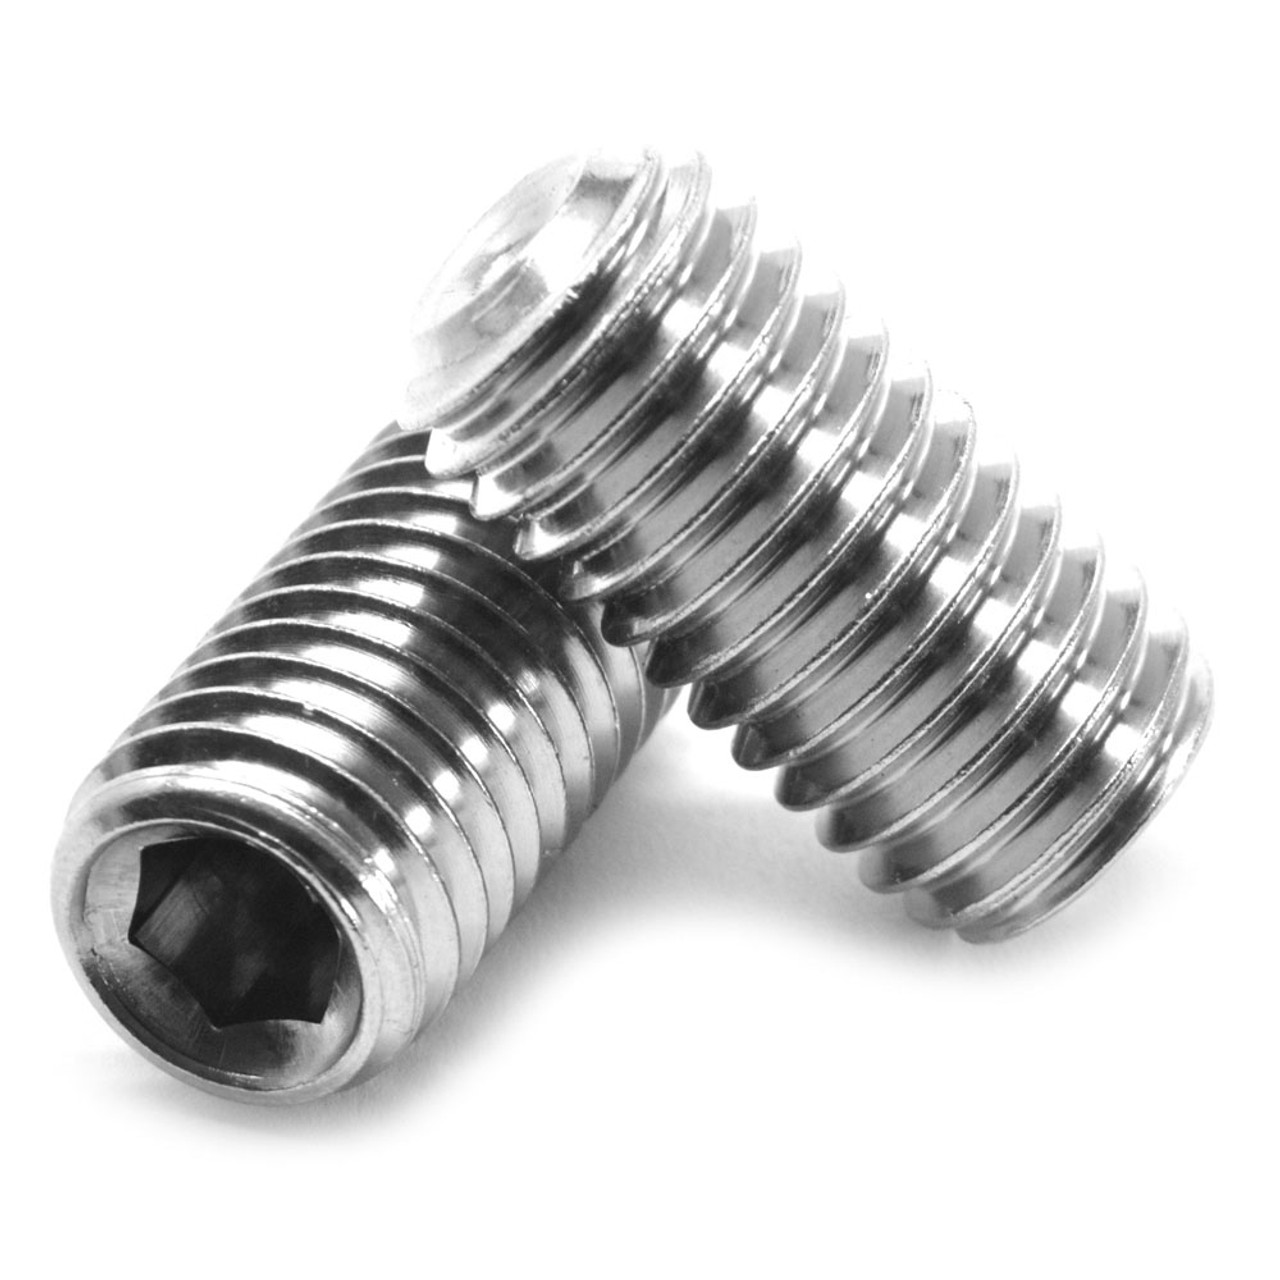 M2.5 x 0.45 x 16 MM Coarse Thread DIN 916 / ISO 4029 Socket Set Screw Cup Point Stainless Steel 18-8